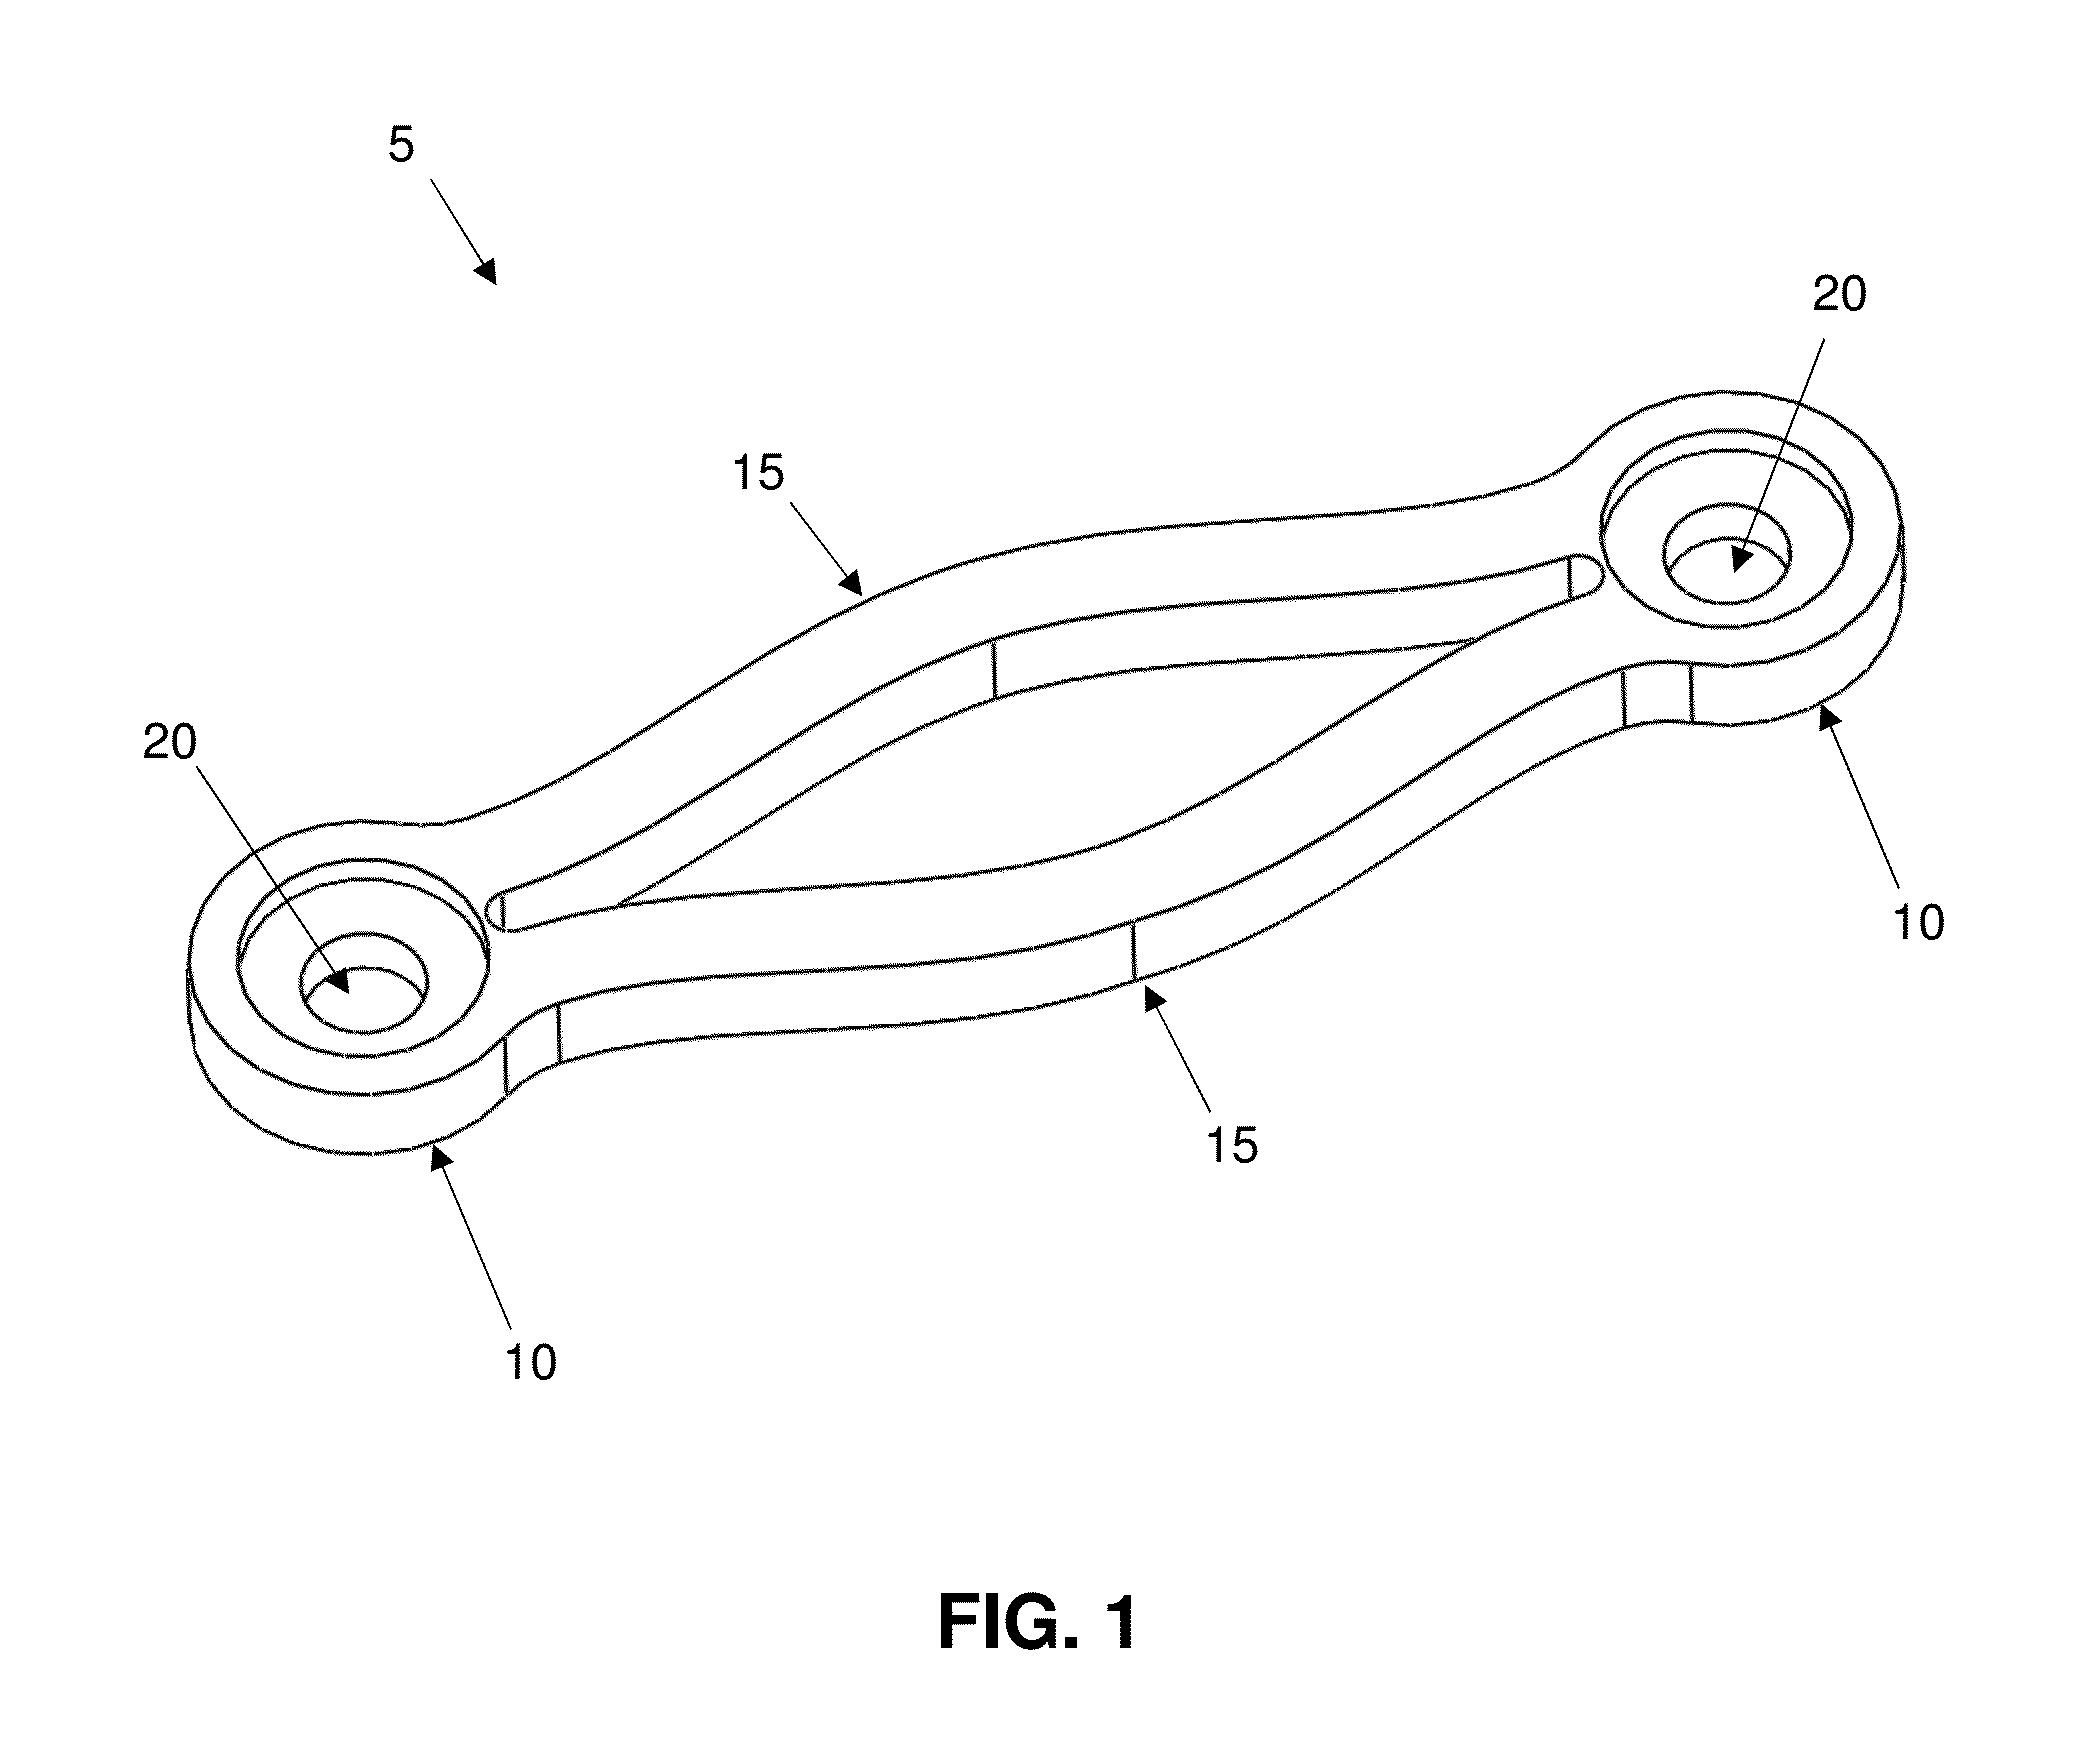 Plates for generating, applying and maintaining compression within a body